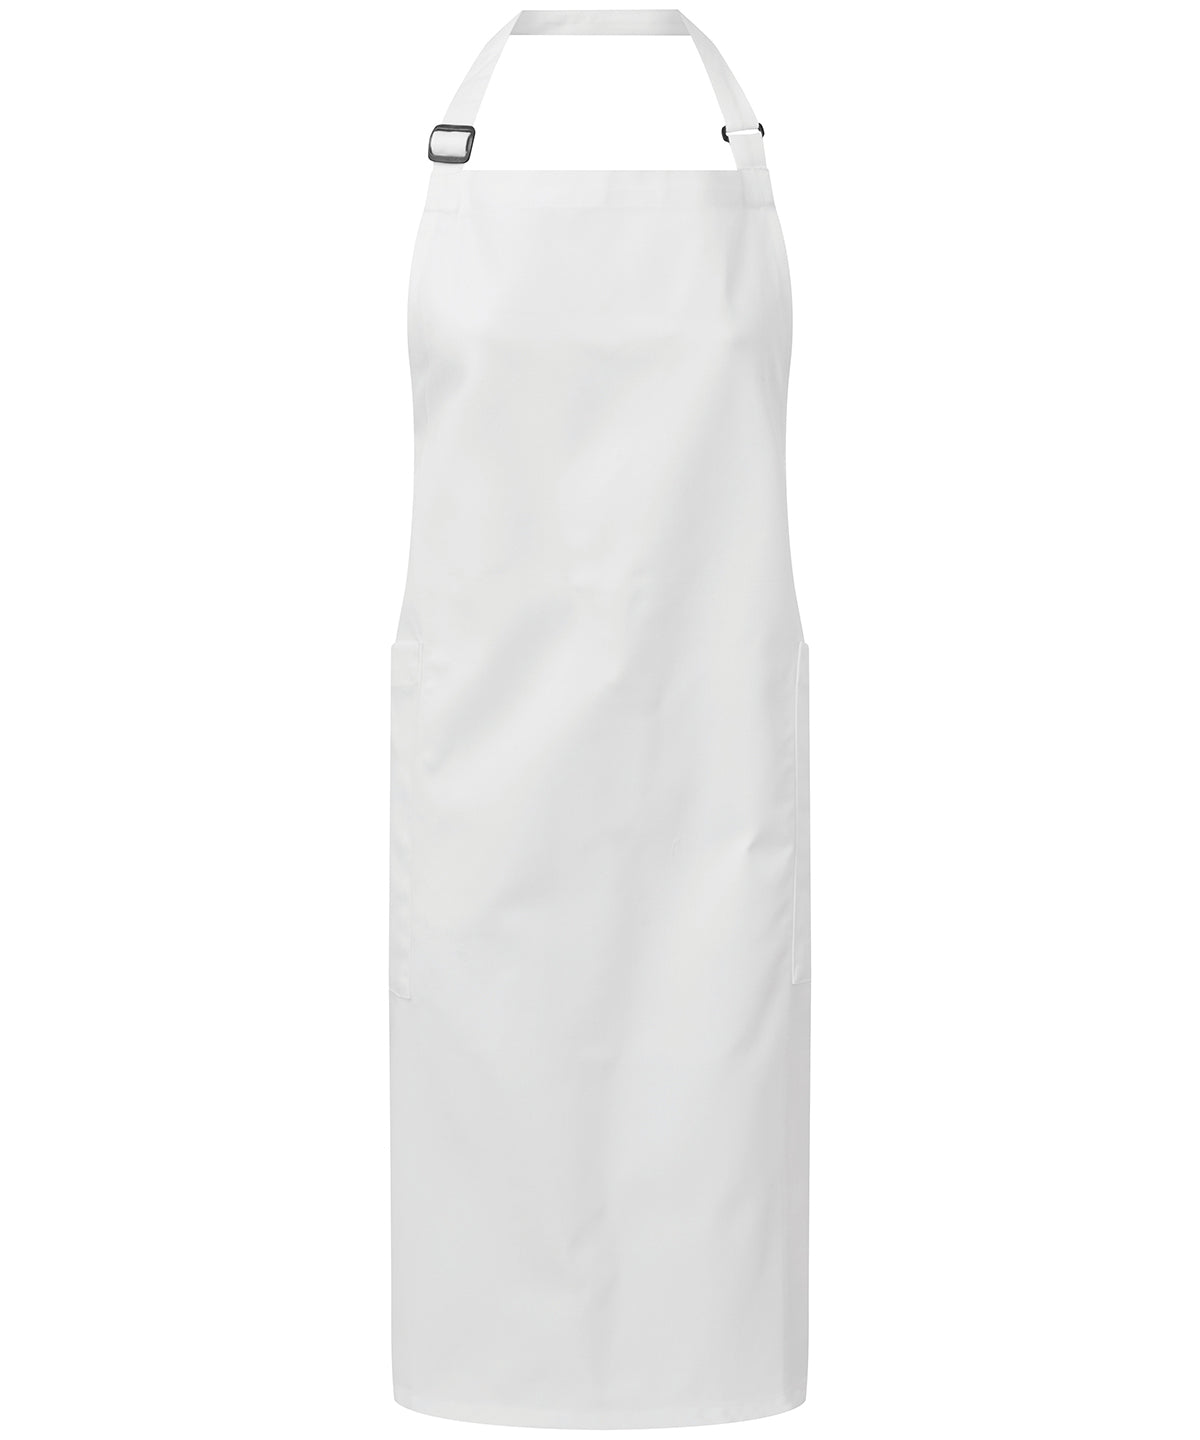 Recycled Polyester And Cotton Bib Apron, Organic And Fairtrade Certified